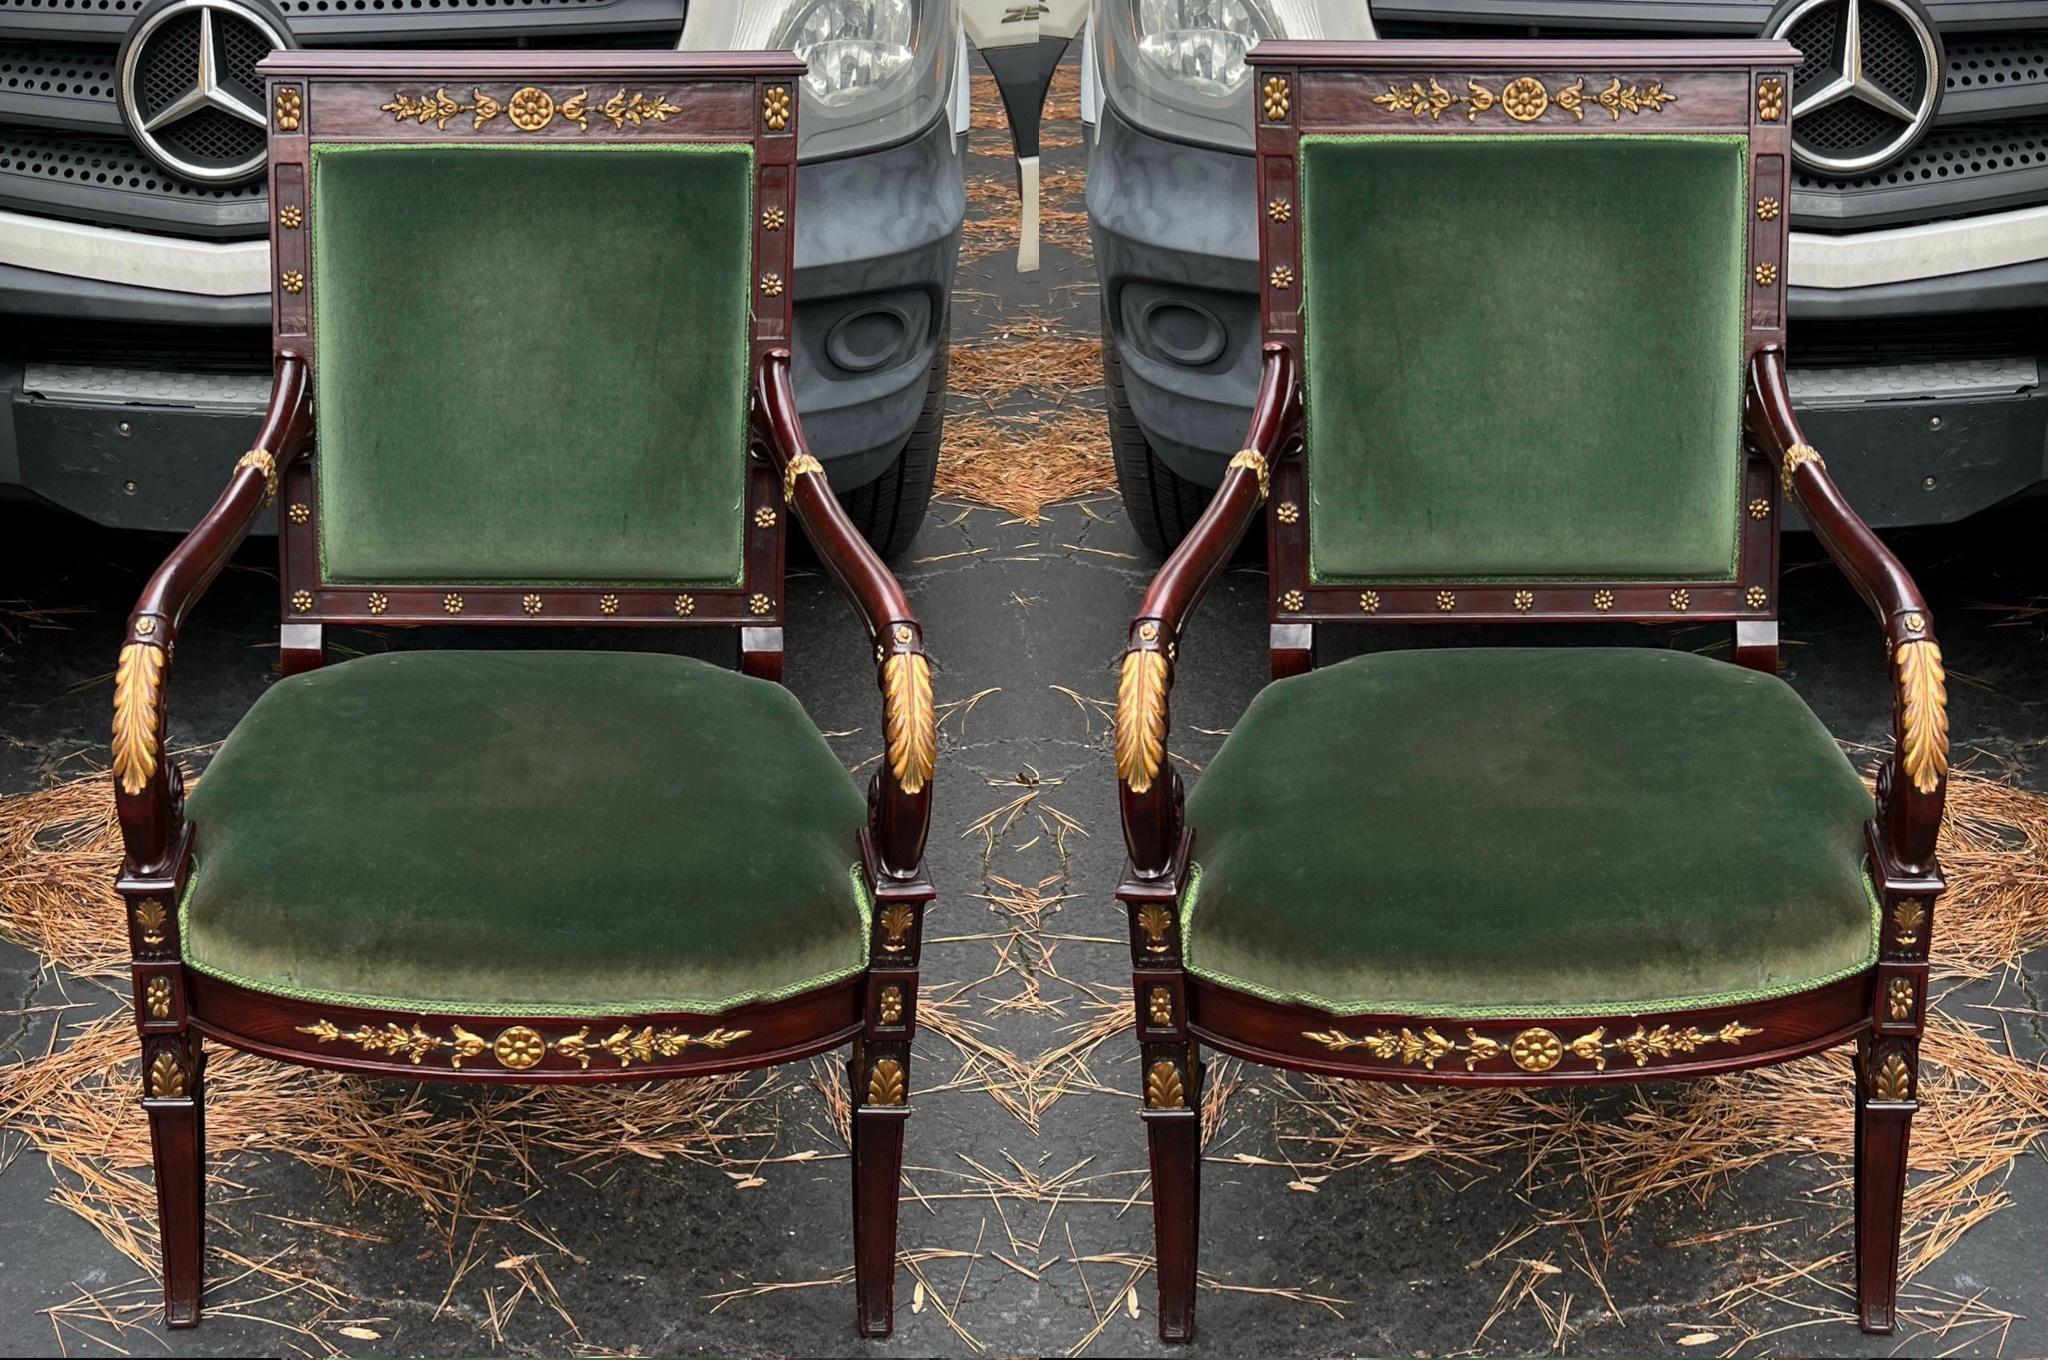 20th-C. Fruitwood and Giltwood Italian Bergere Chairs in Green Velvet, Pair For Sale 5